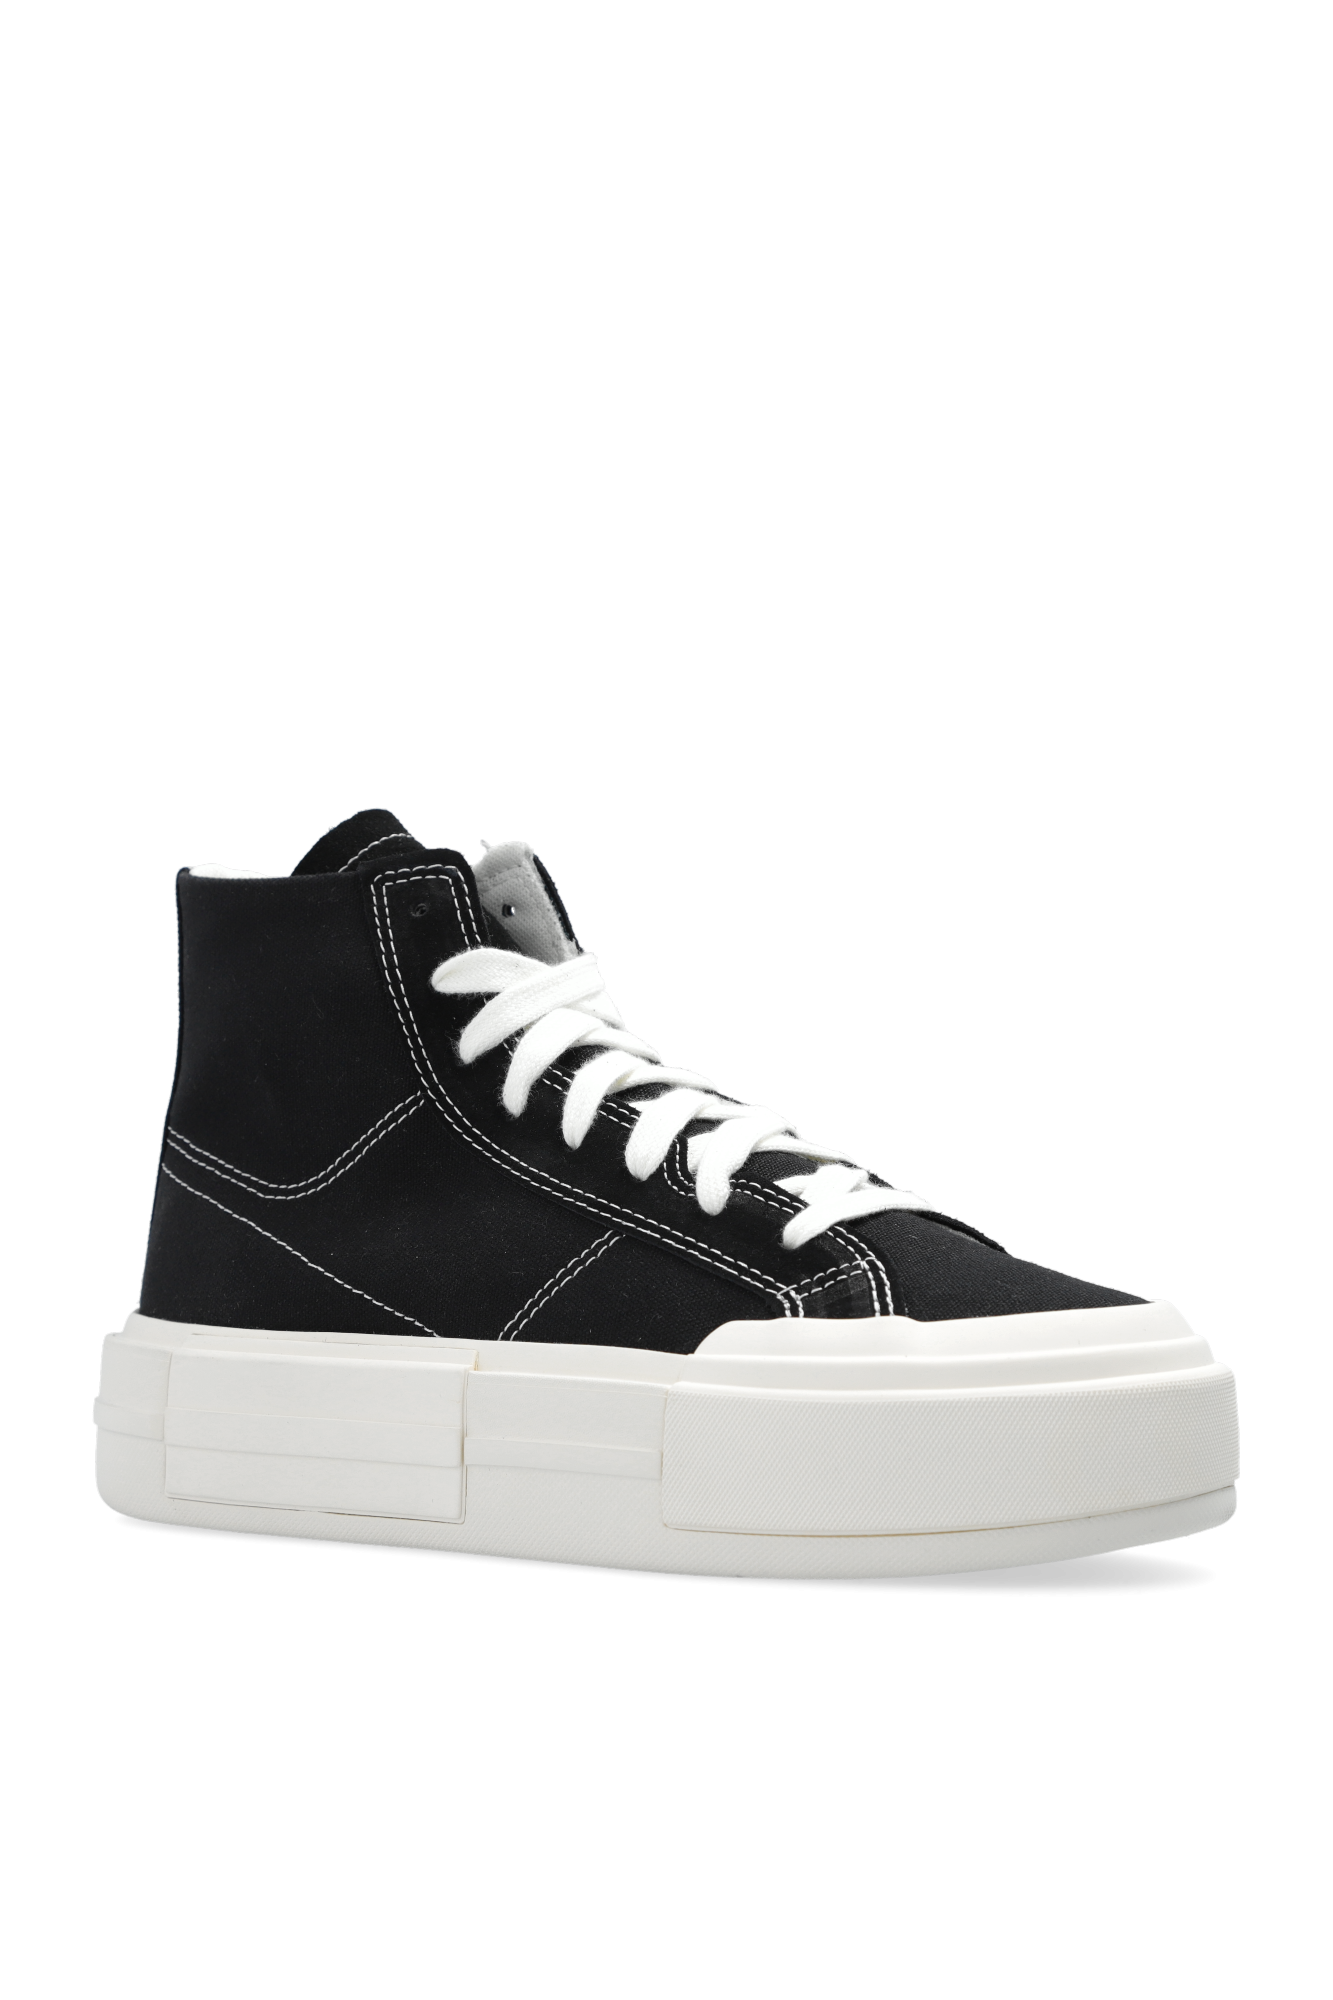 Converse ‘Chuck Taylor All Star Cruise High’ sneakers | Women's Shoes ...